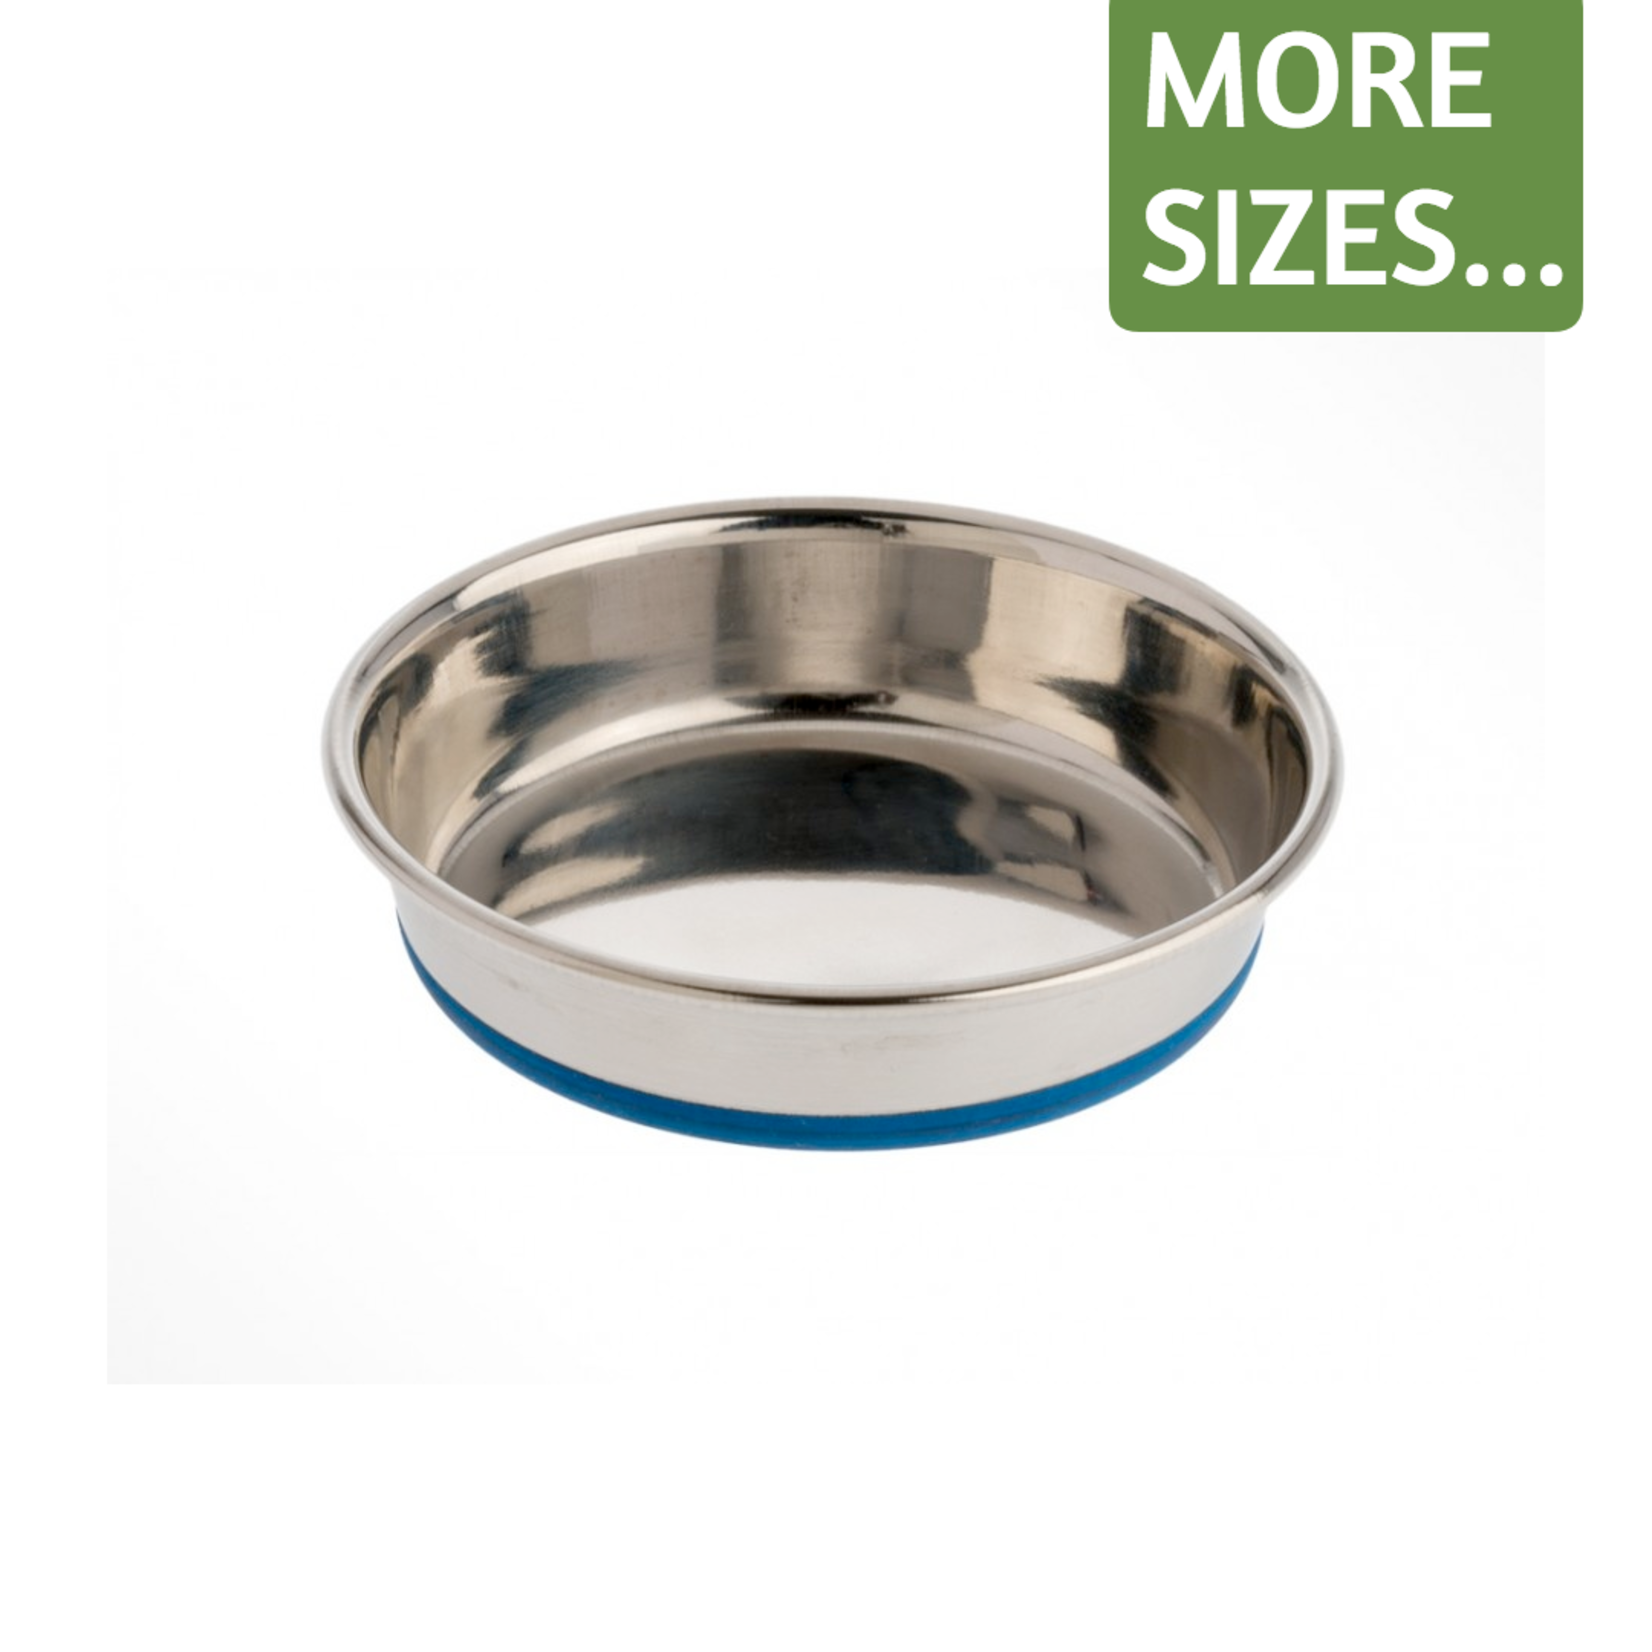 OurPets by Cosmic OurPets Durapet Premium Rubber-Bonded Stainless Steel Cat Dishes